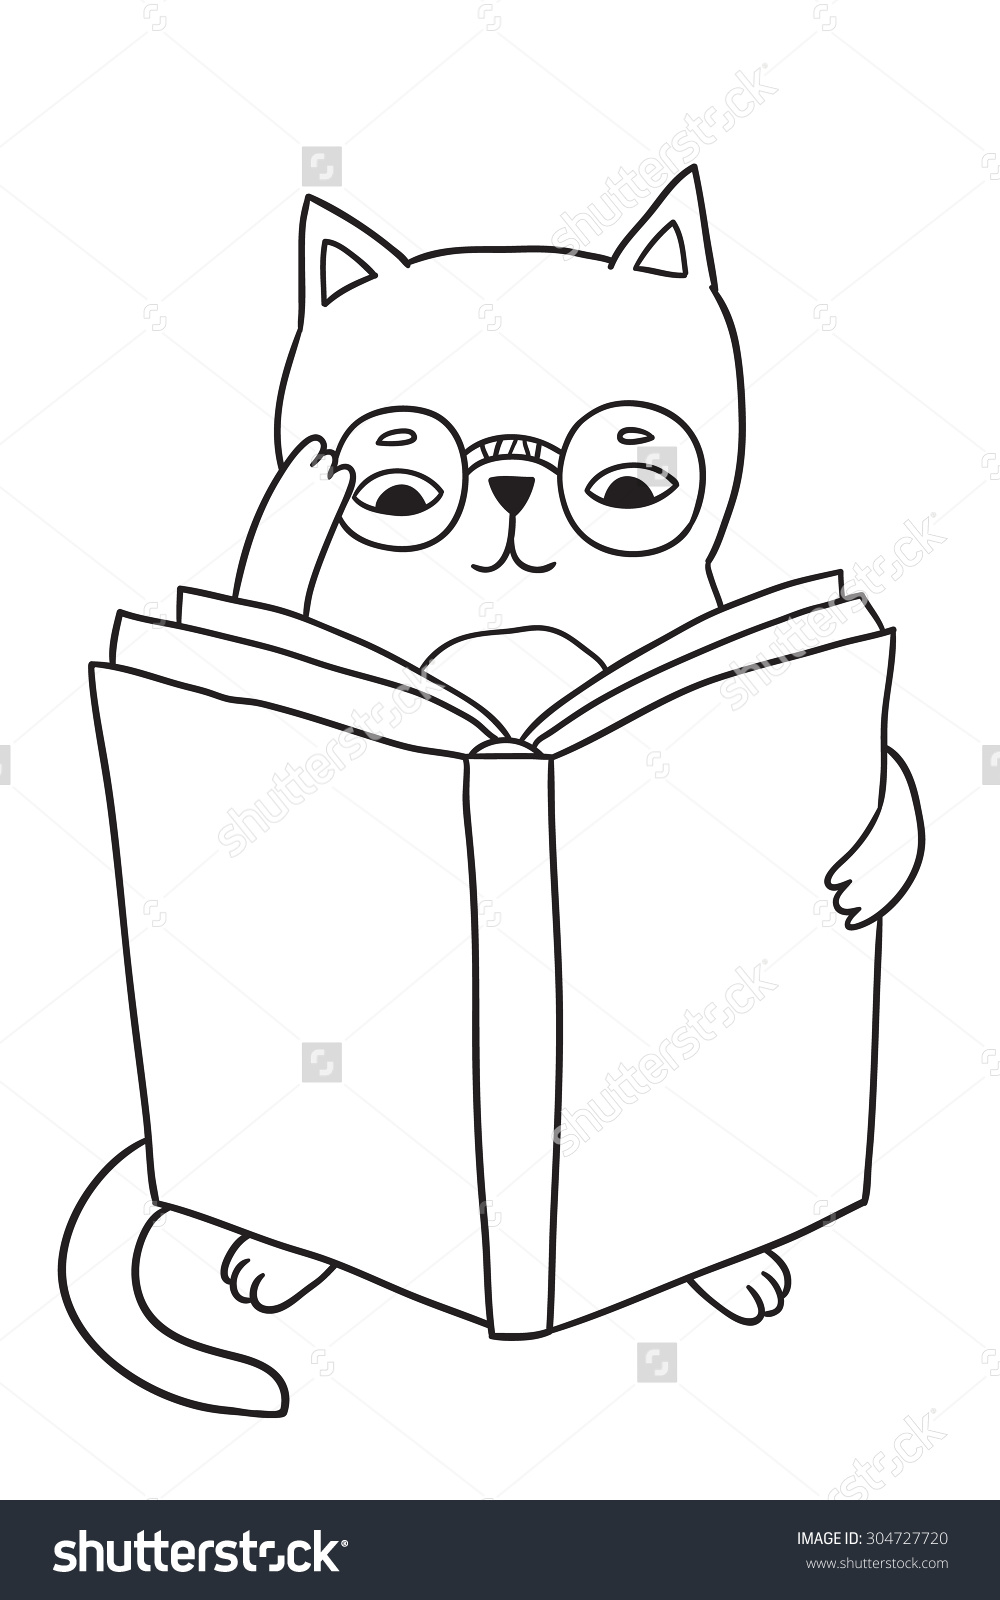 Cute Doodle Kitty Cat Reading Book Stock Vector 304727720.